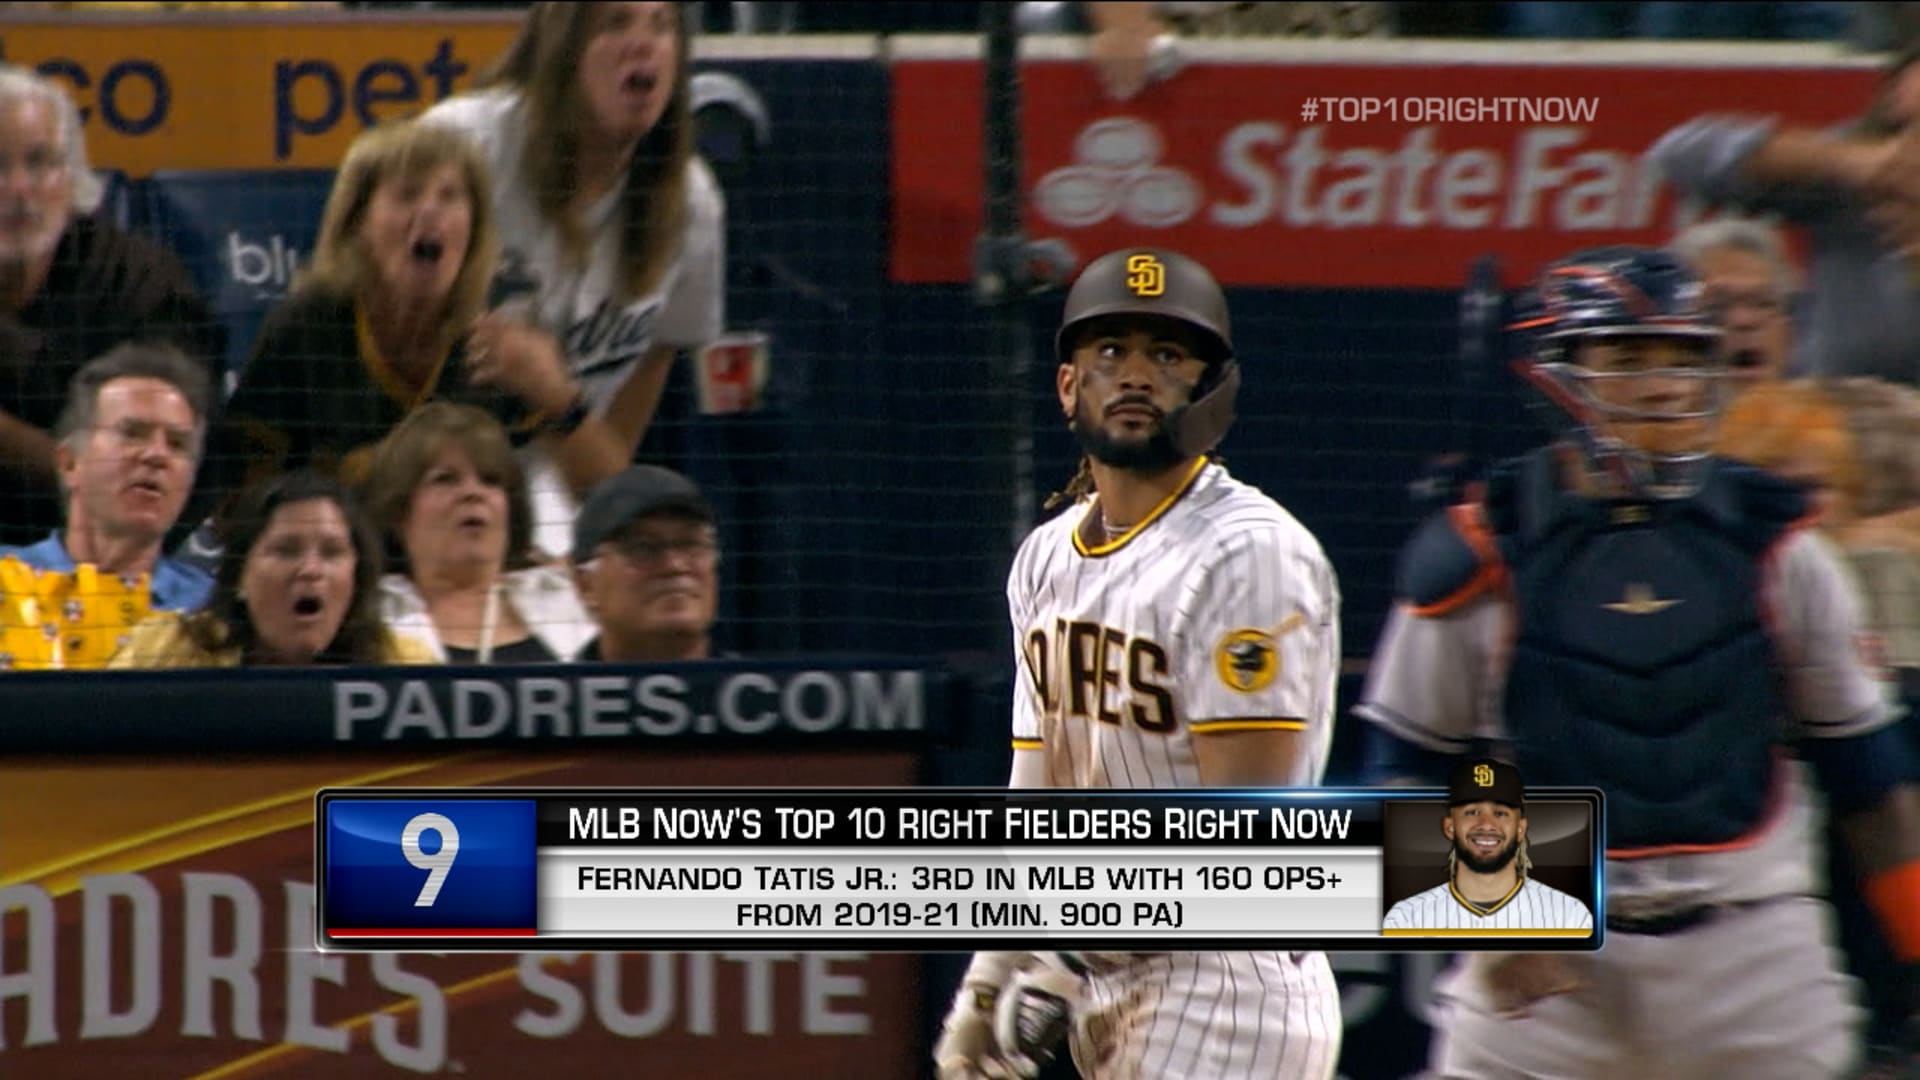 MLB Stories - MLB Now's Top 10 Right Fielders Right Now